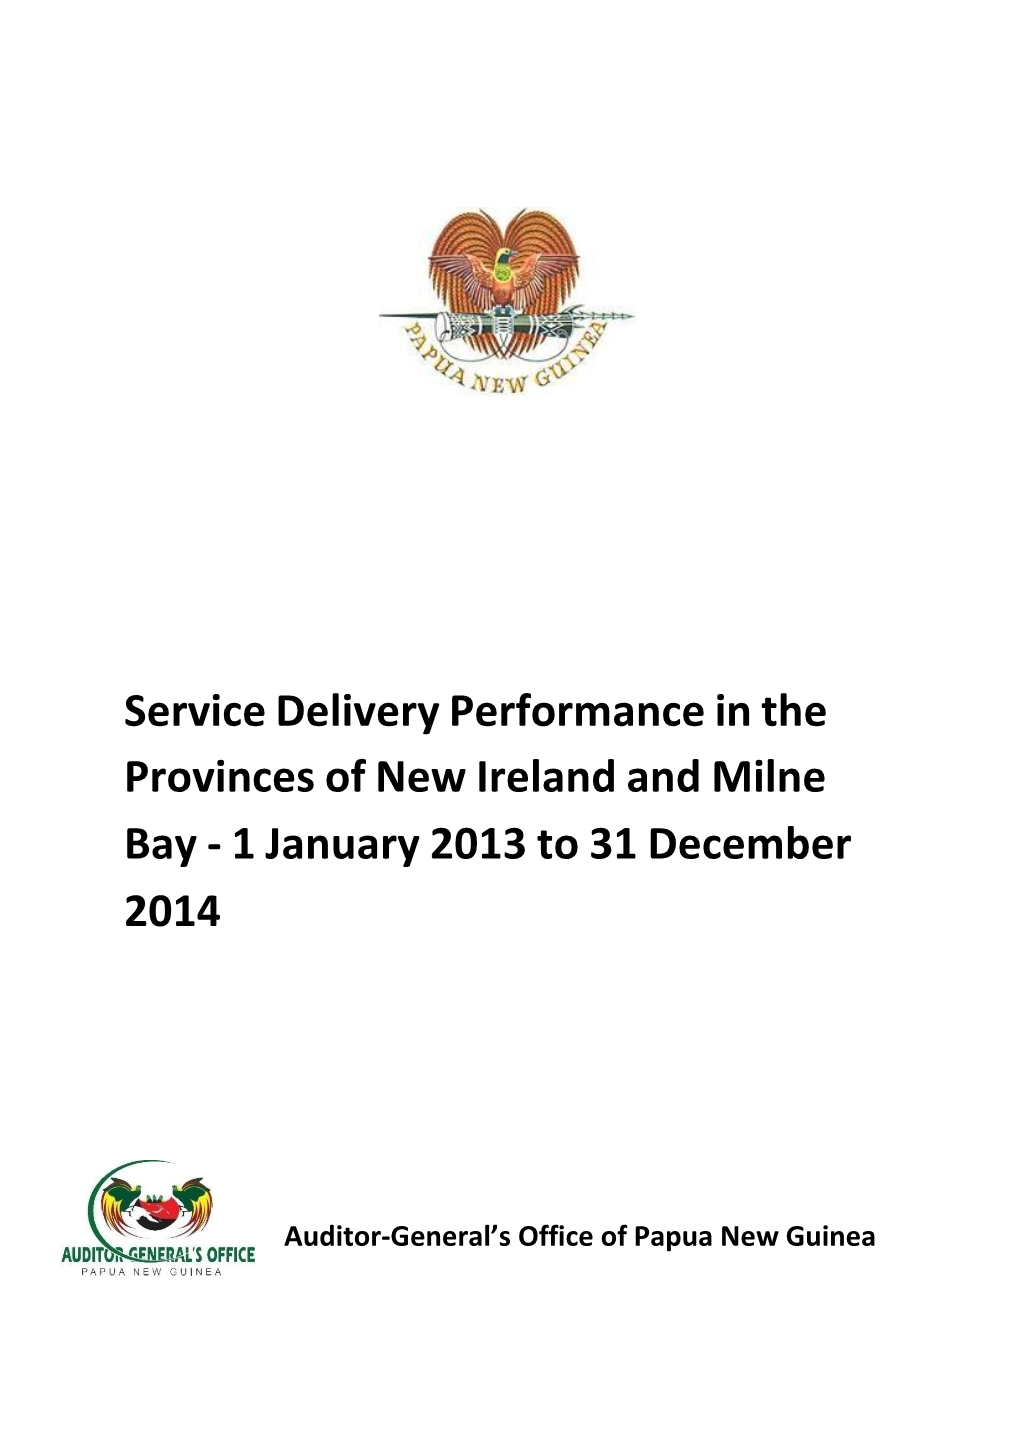 Service Delivery Performance in the Provinces of New Ireland and Milne Bay - 1 January 2013 to 31 December 2014